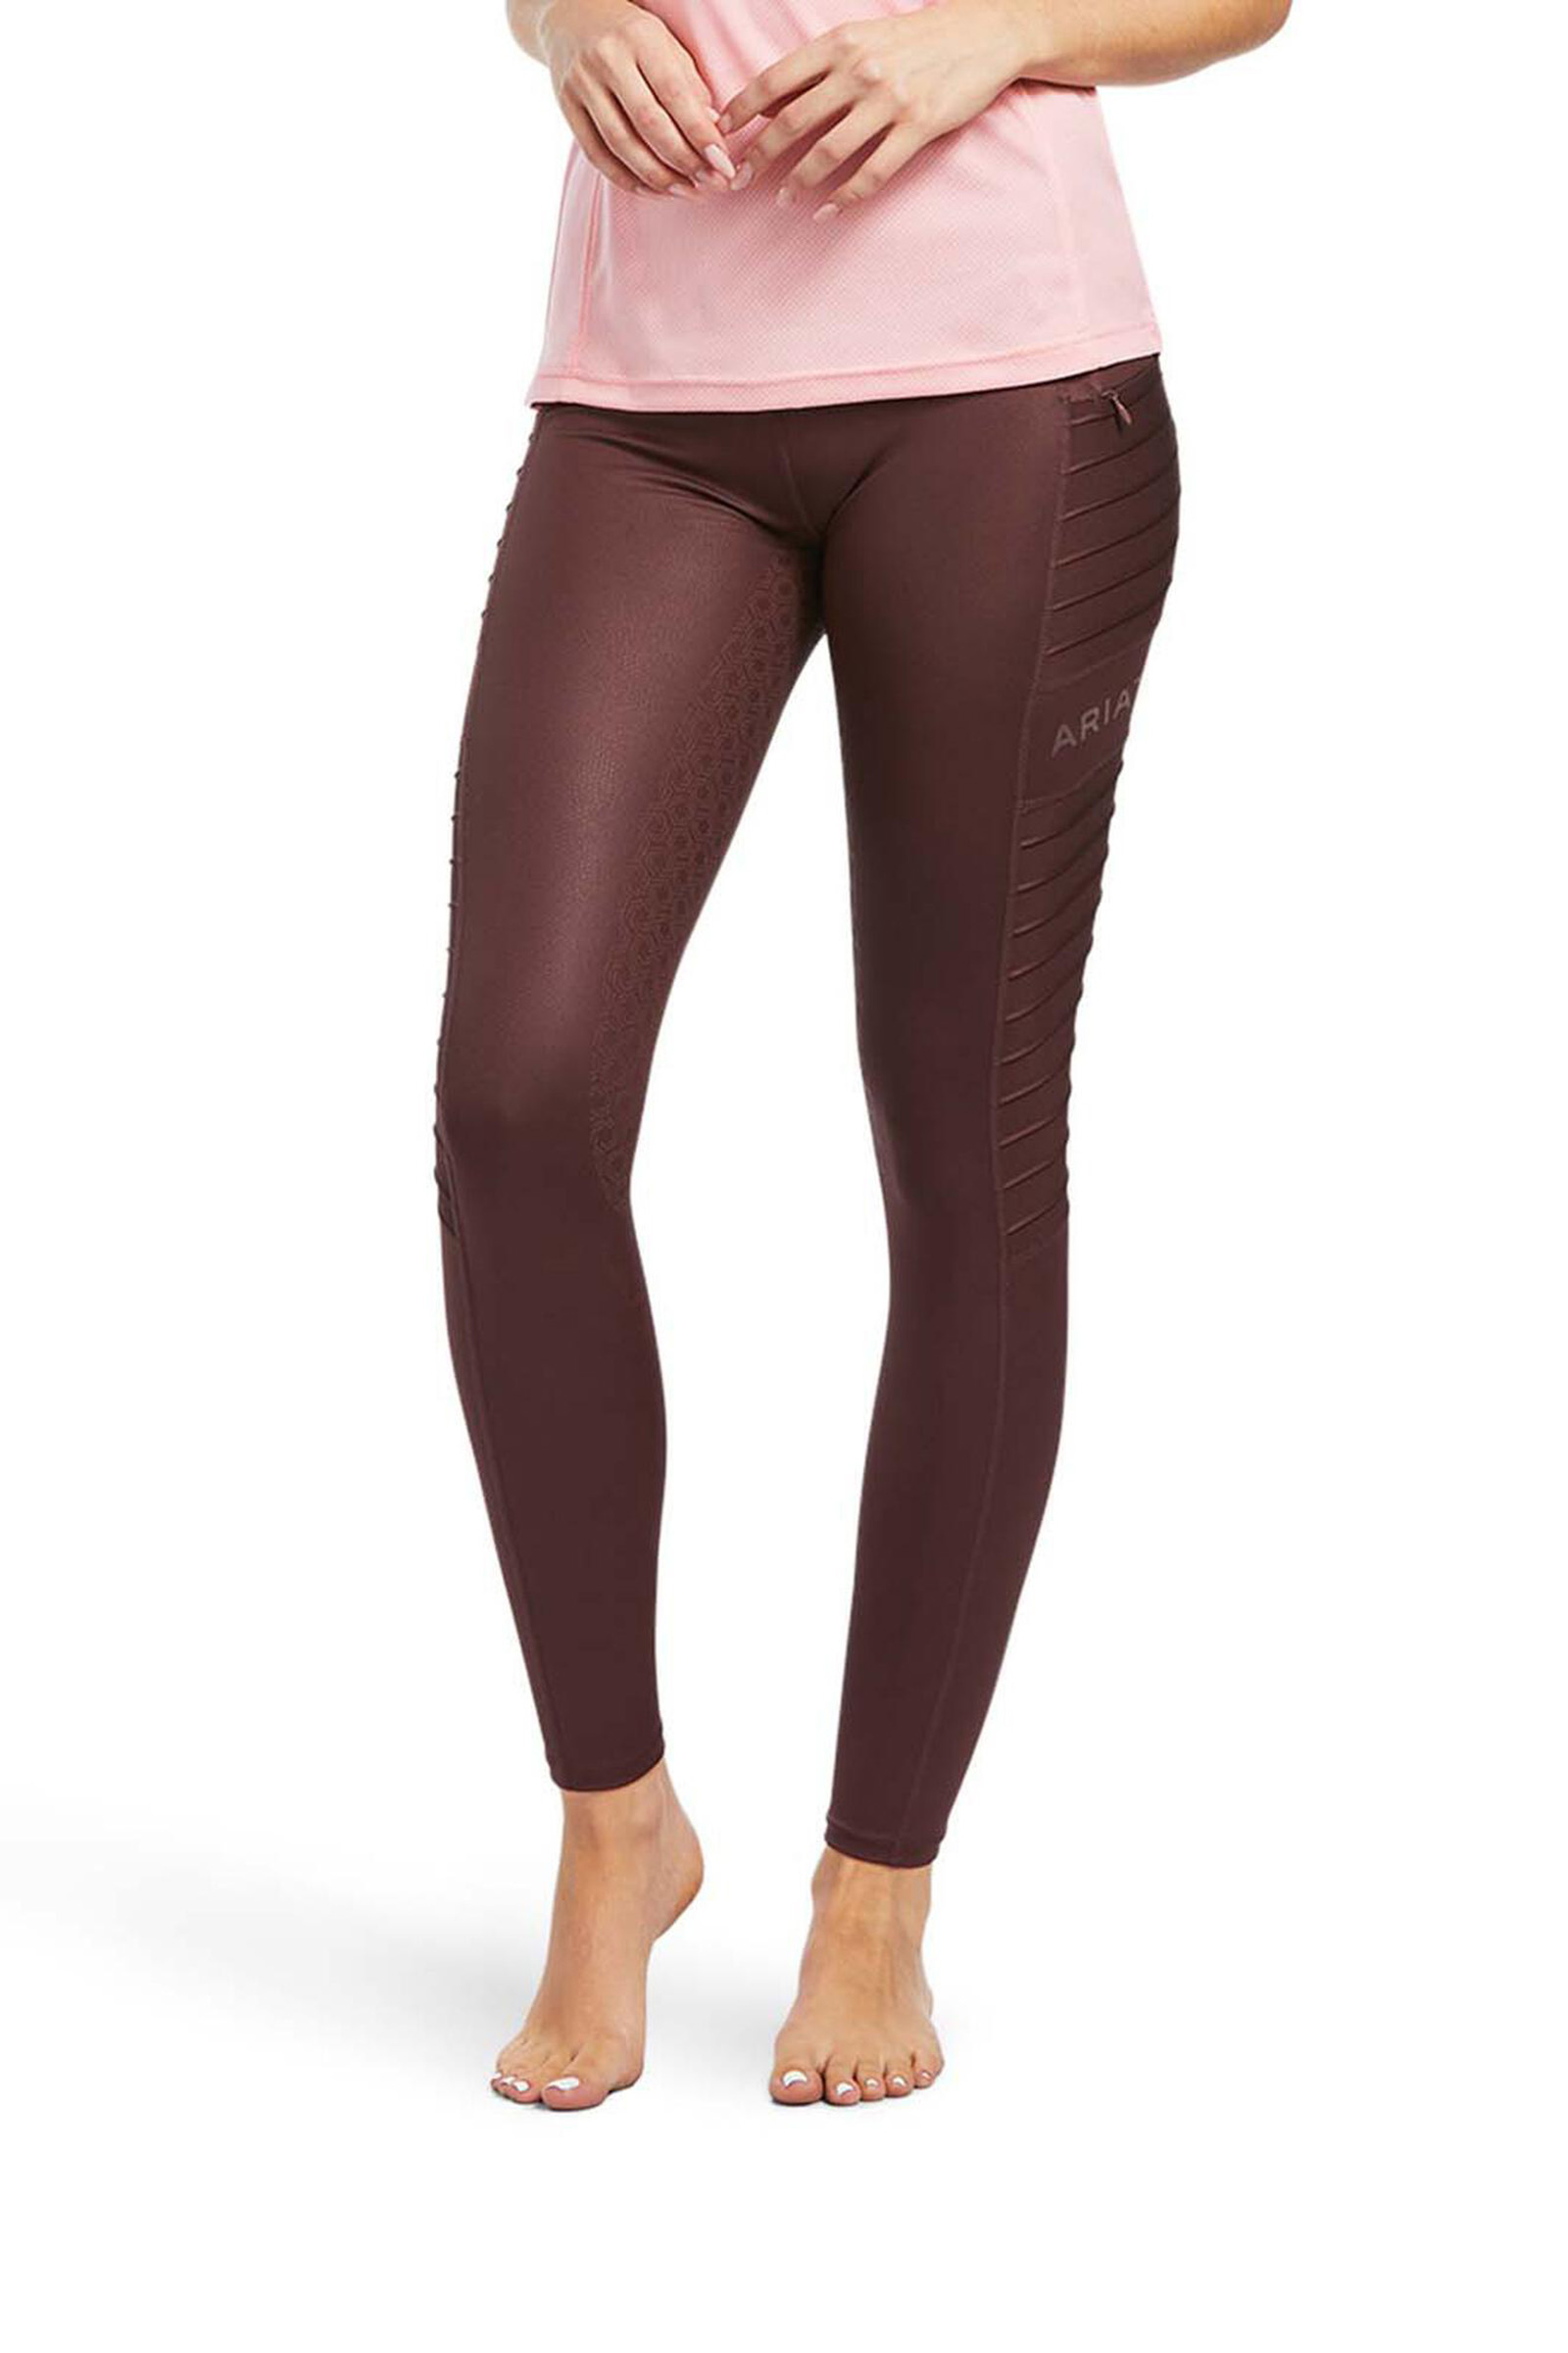 Ariat - Tried and true performance. The EOS Moto Tight.